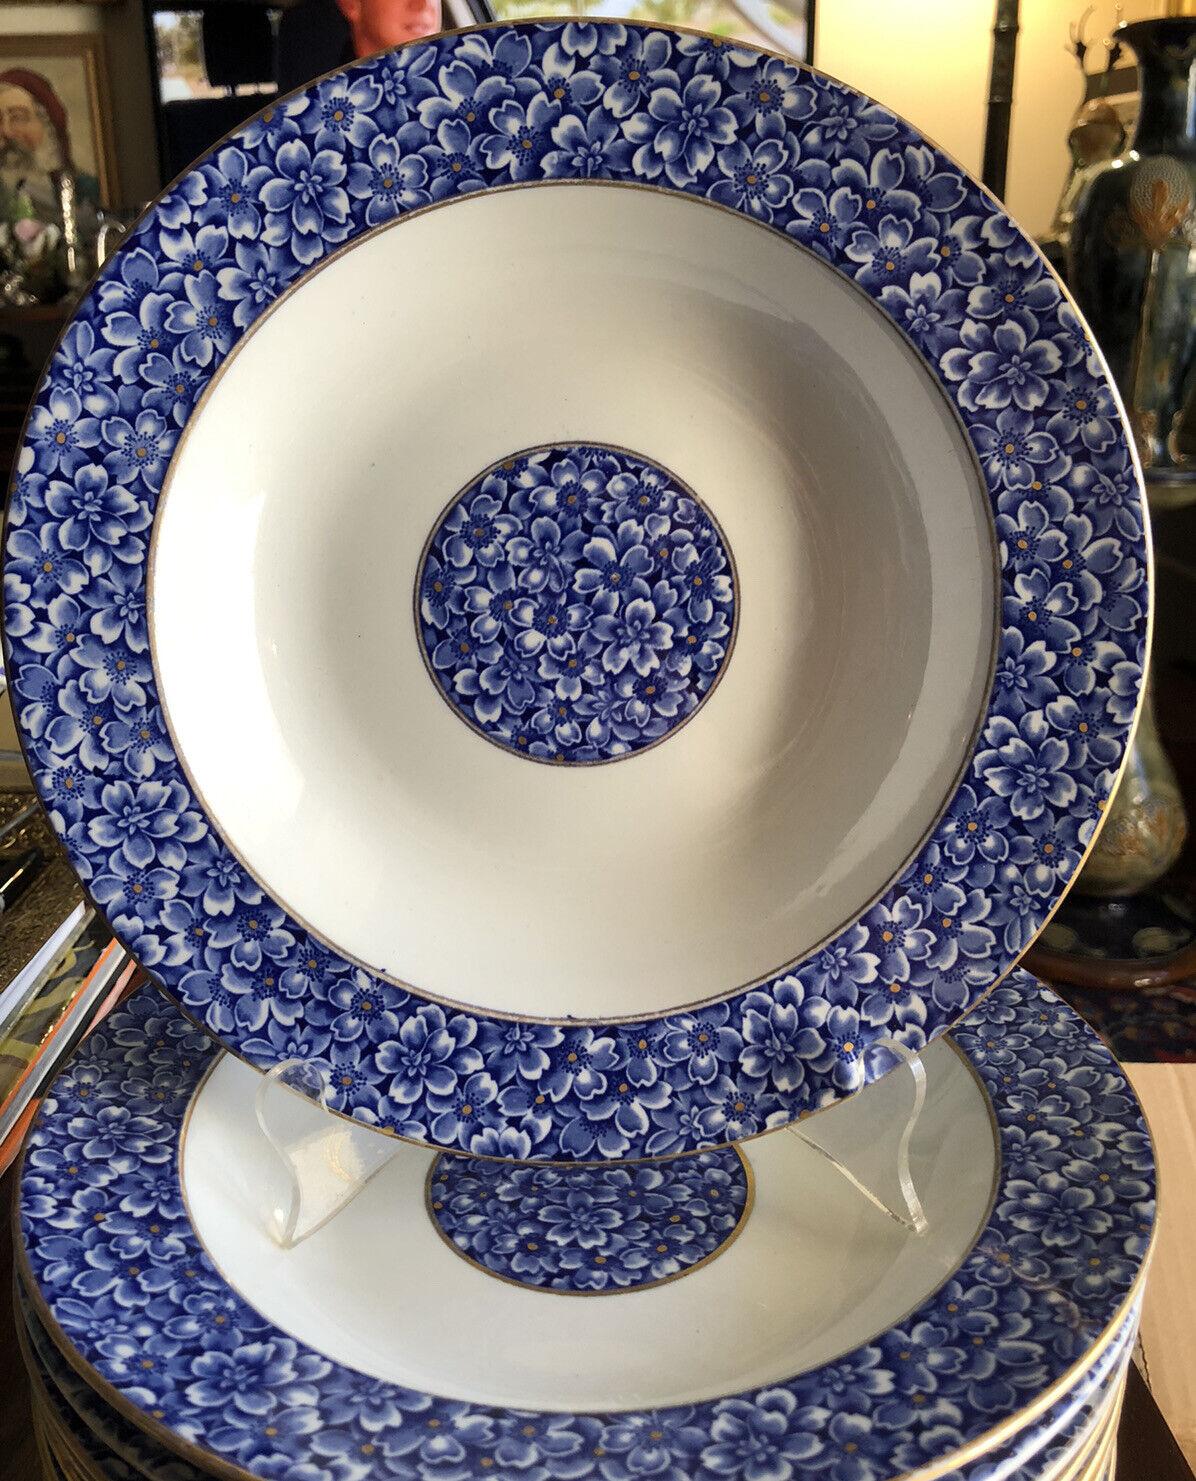 Royal Worcester (English, 1751-2008) for Tiffany & Company (American, founded 1837). Circa 1877. A set of 10 Soup or Salad Bowls with a beautiful blue floral pattern to center of bowl and rim. Underside marked appropriately with registry mark for